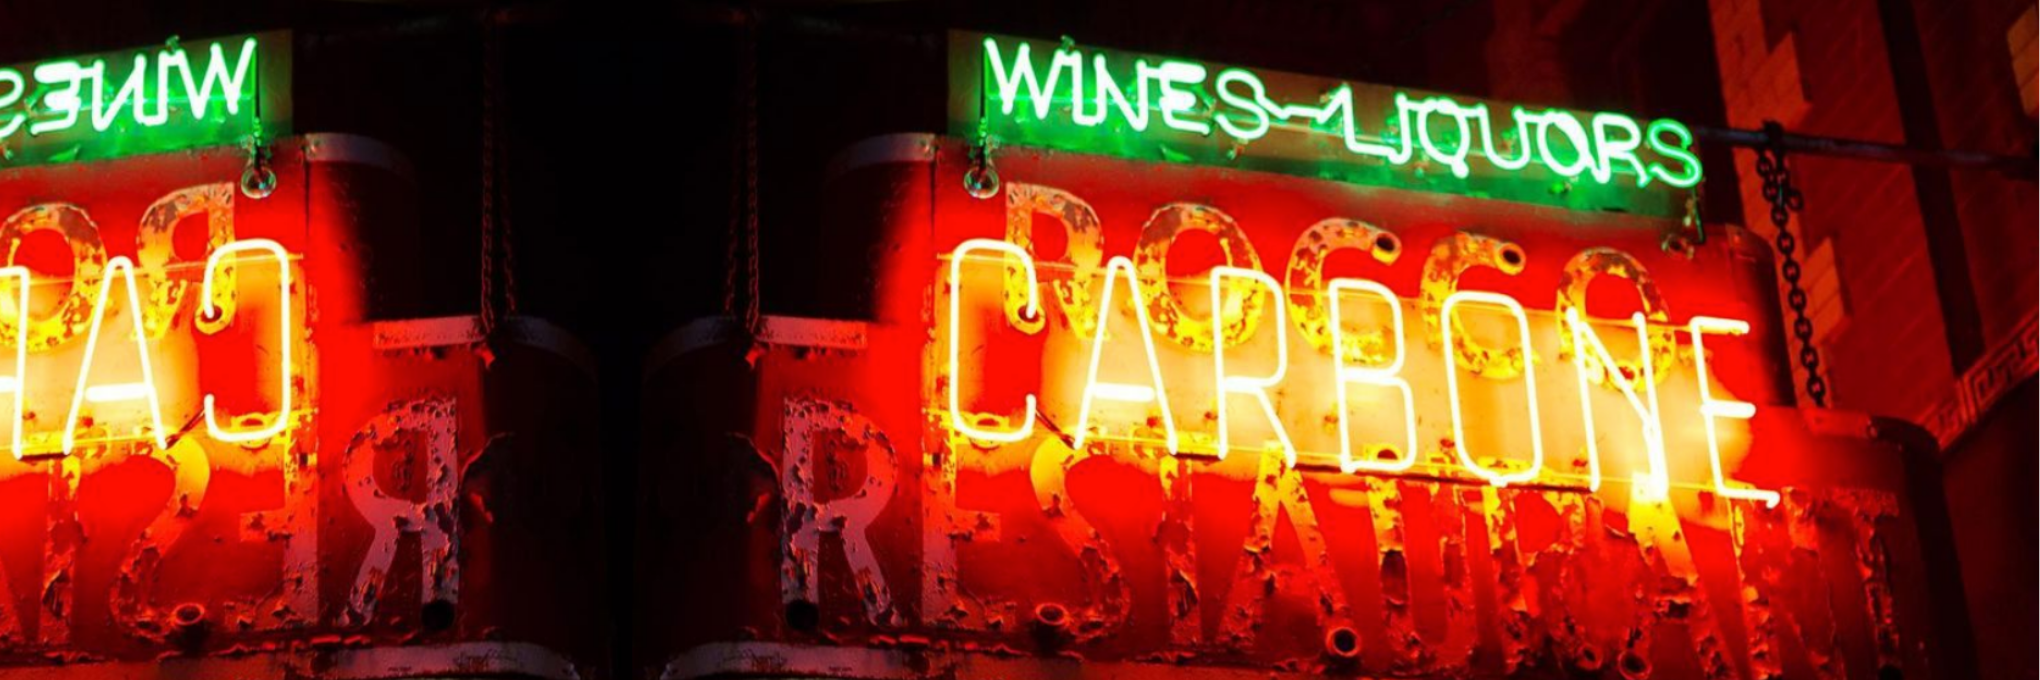 What Wines to Order at Carbone